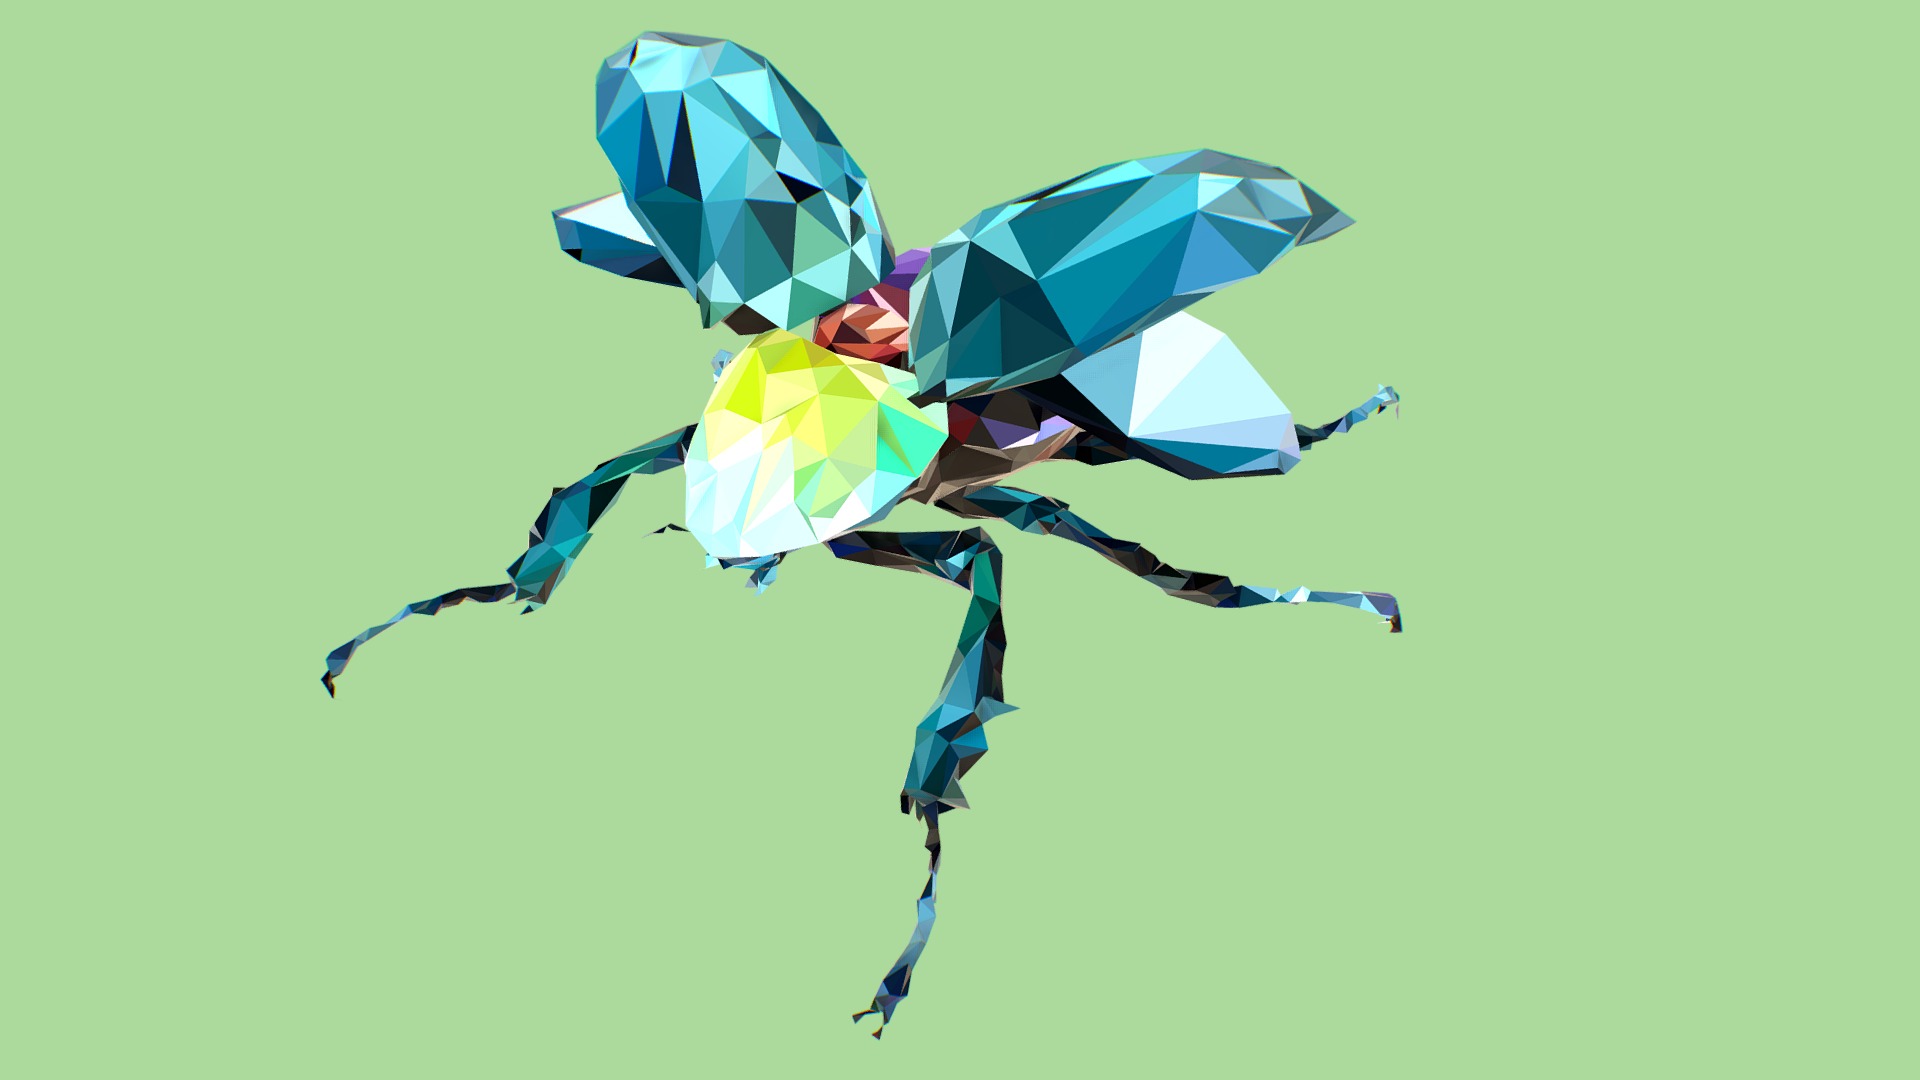 3D model Low Poly ARt Giant Beetle Insect - This is a 3D model of the Low Poly ARt Giant Beetle Insect. The 3D model is about a group of kites flying in the sky.